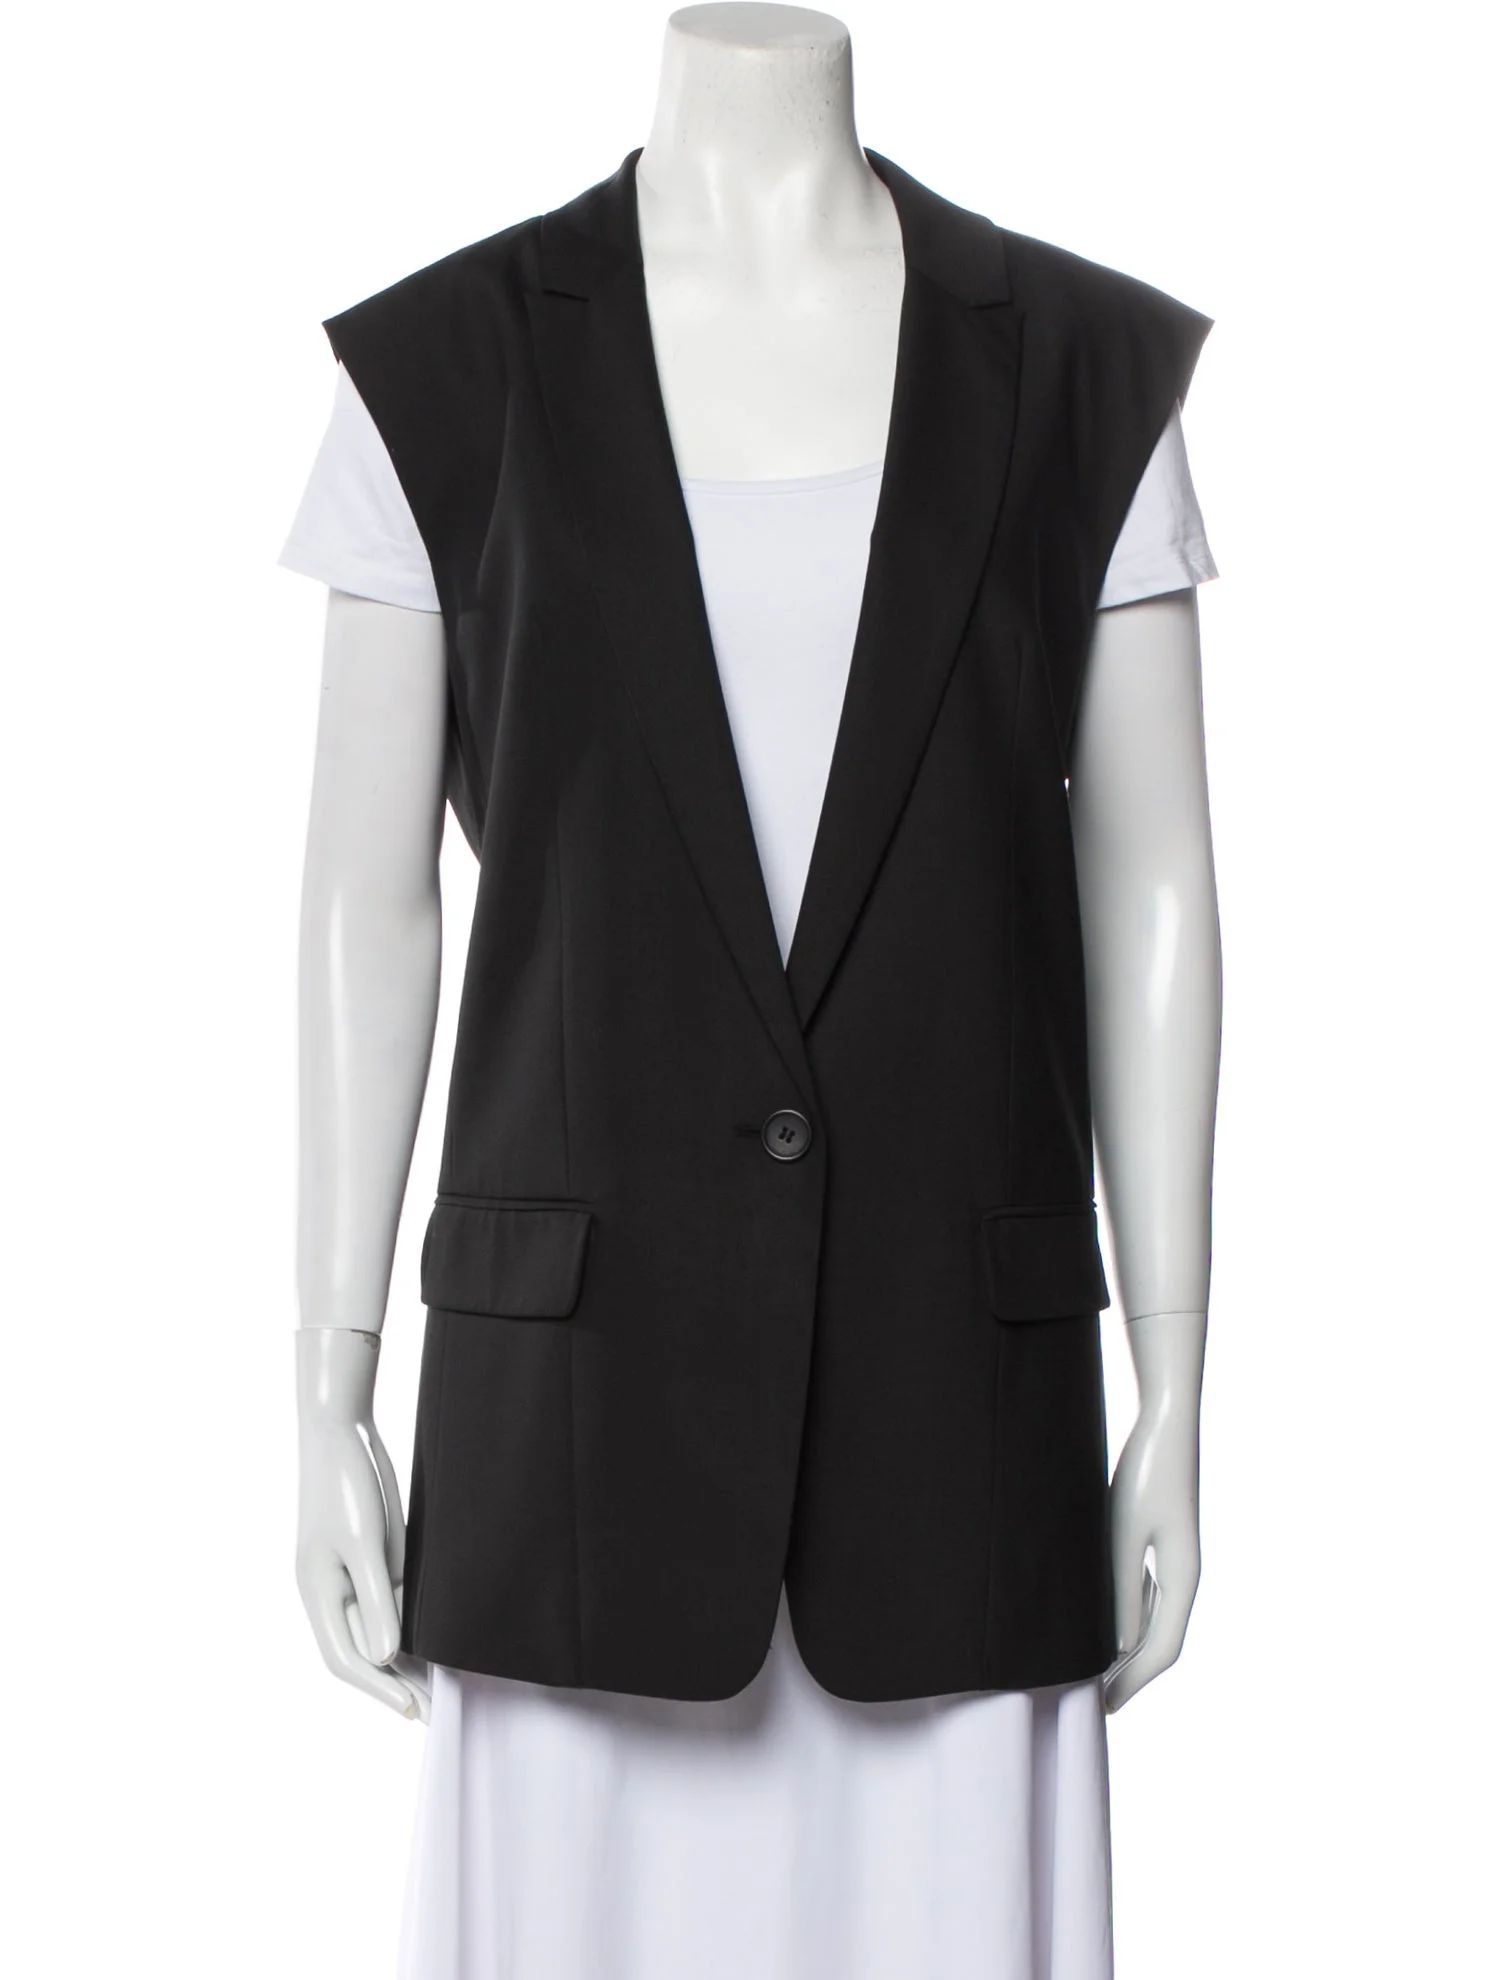 Vest | The RealReal